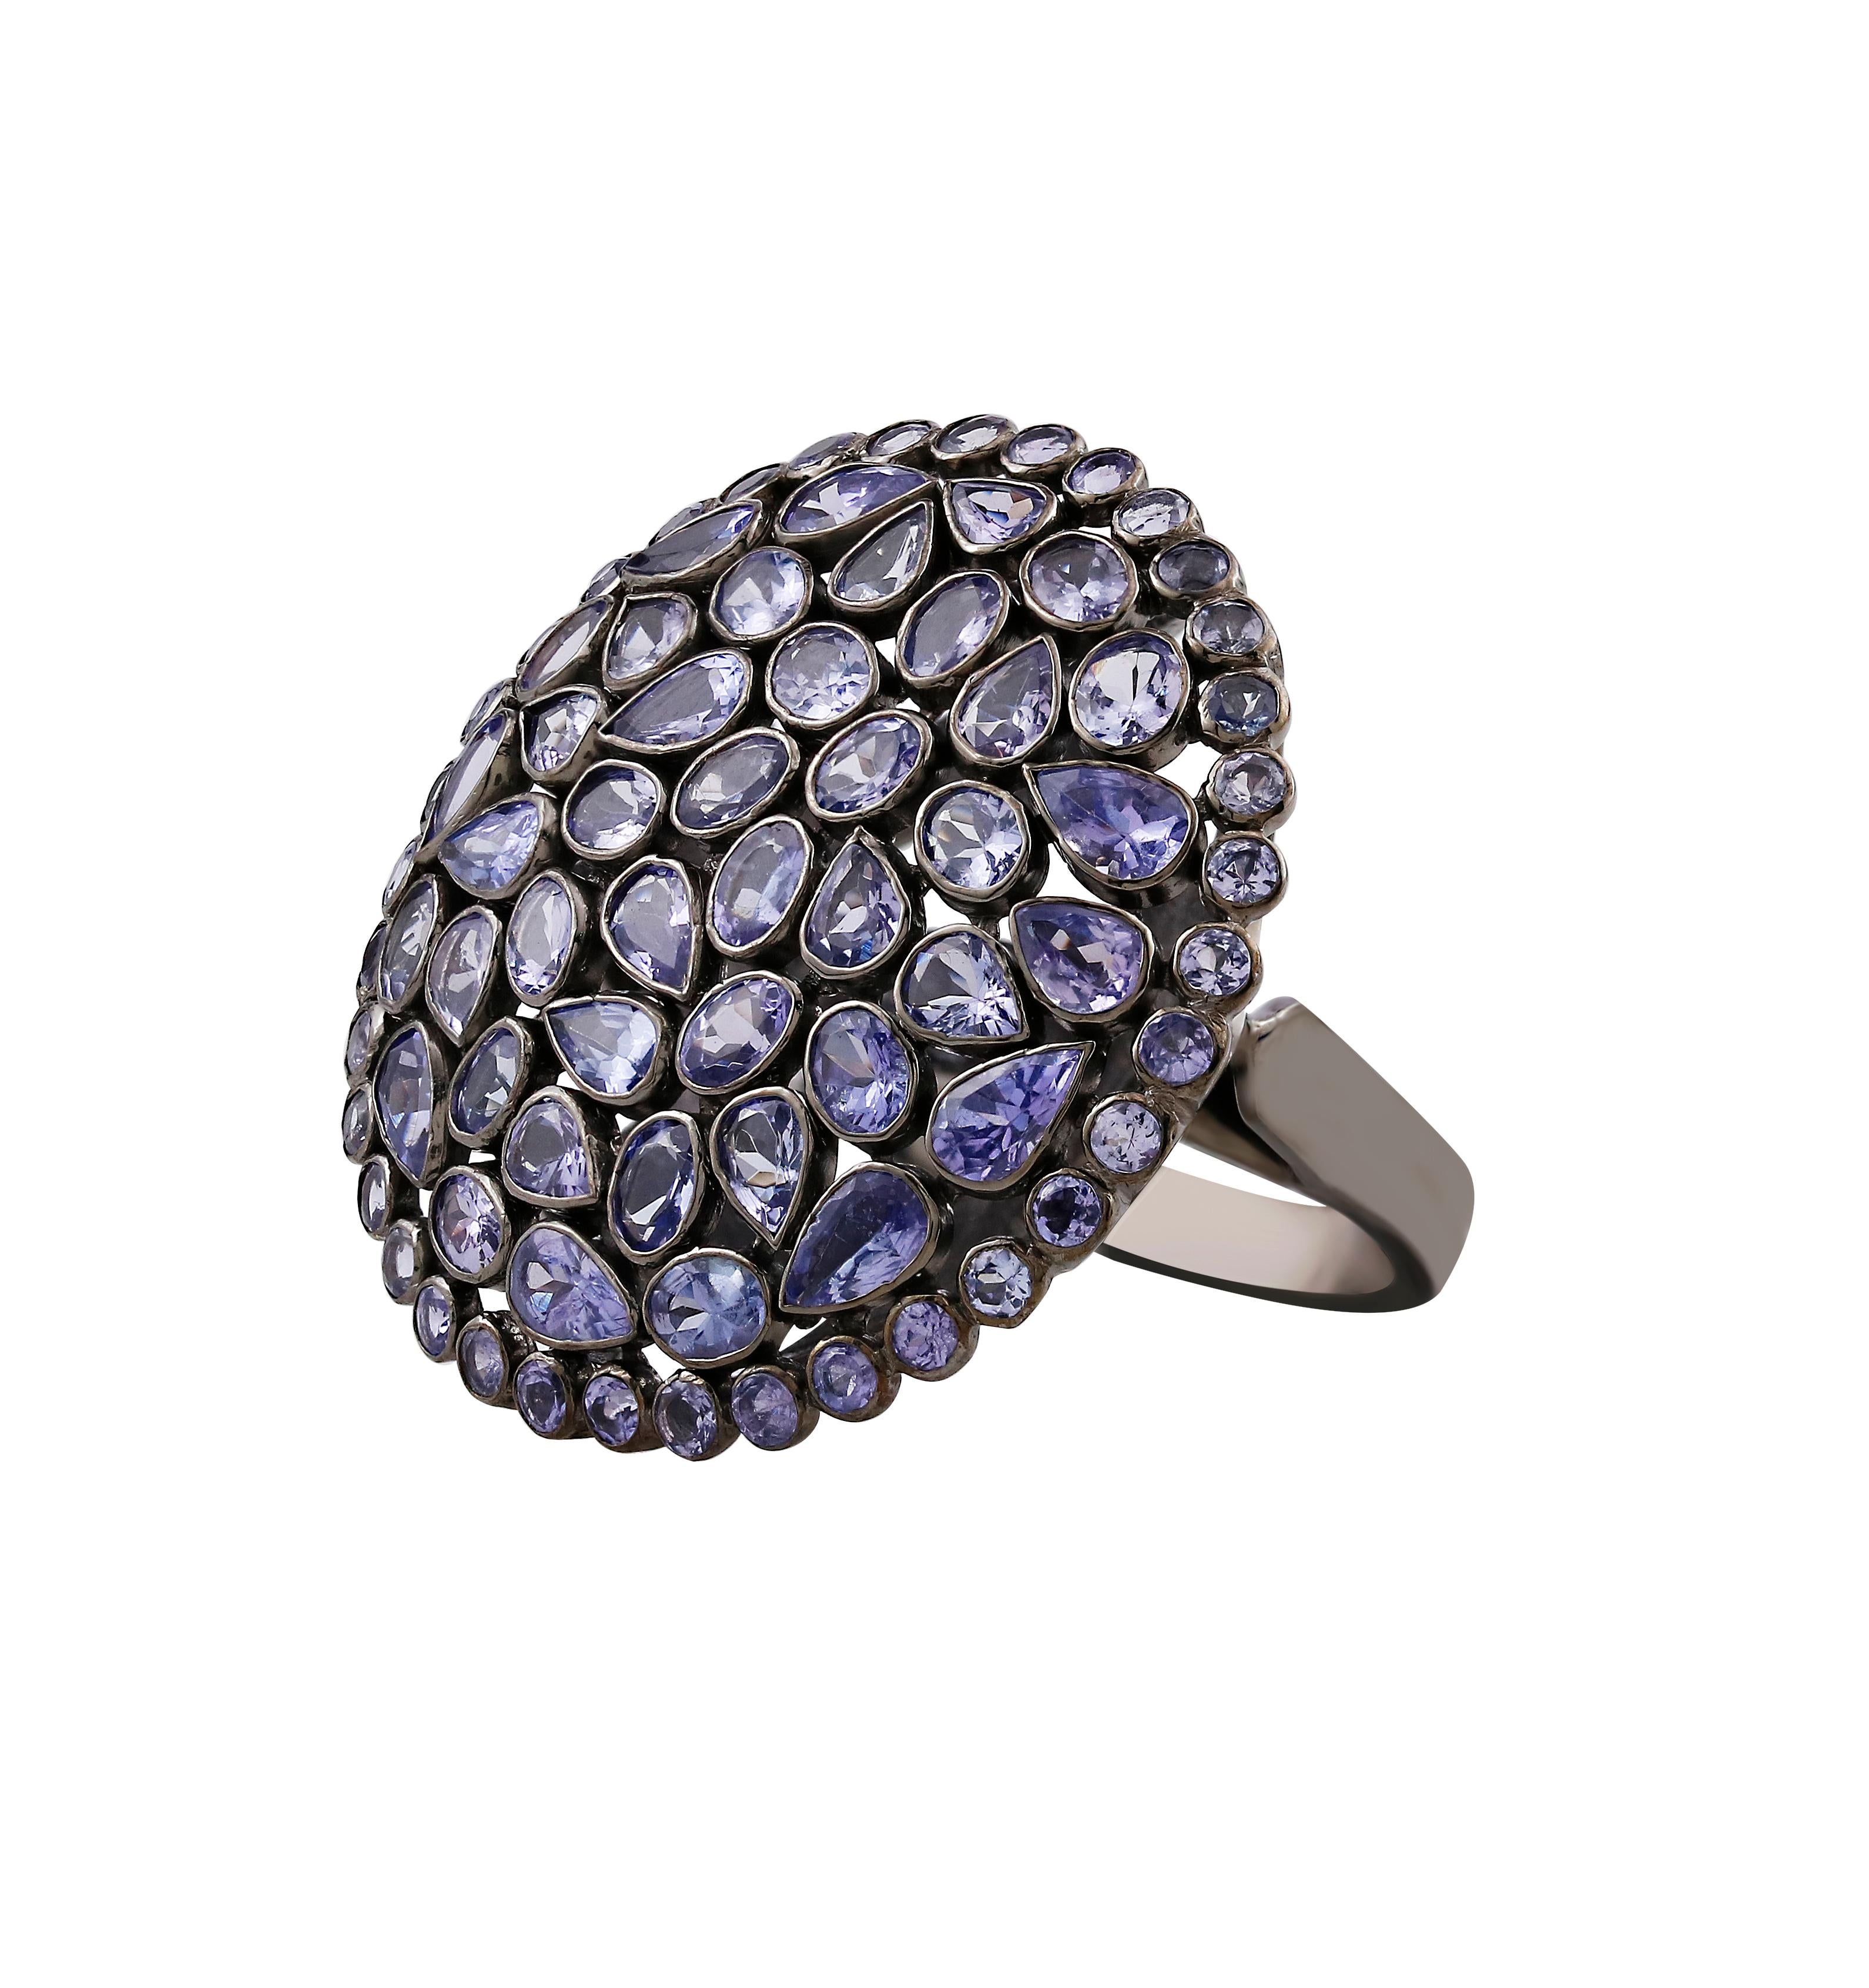 Mixed Cut Gemistry Victorian 8.9cttw Tanzanite Cluster Ring in 925 Sterling Silver For Sale